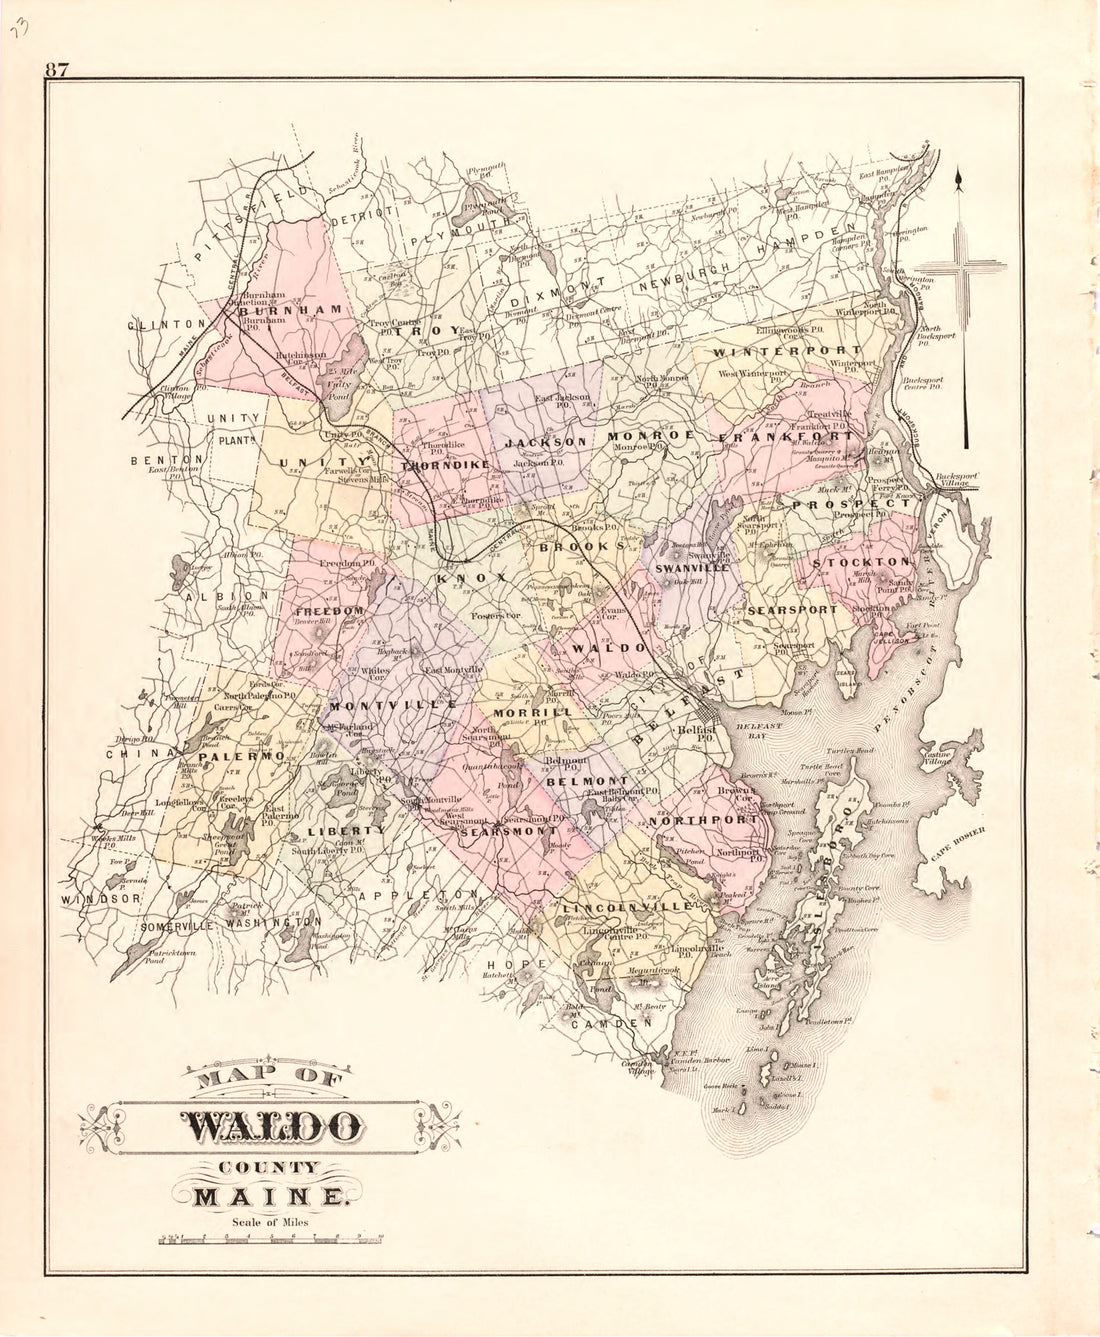 This hand drawn illustration (map) of Map of Waldo County Maine from Colby&